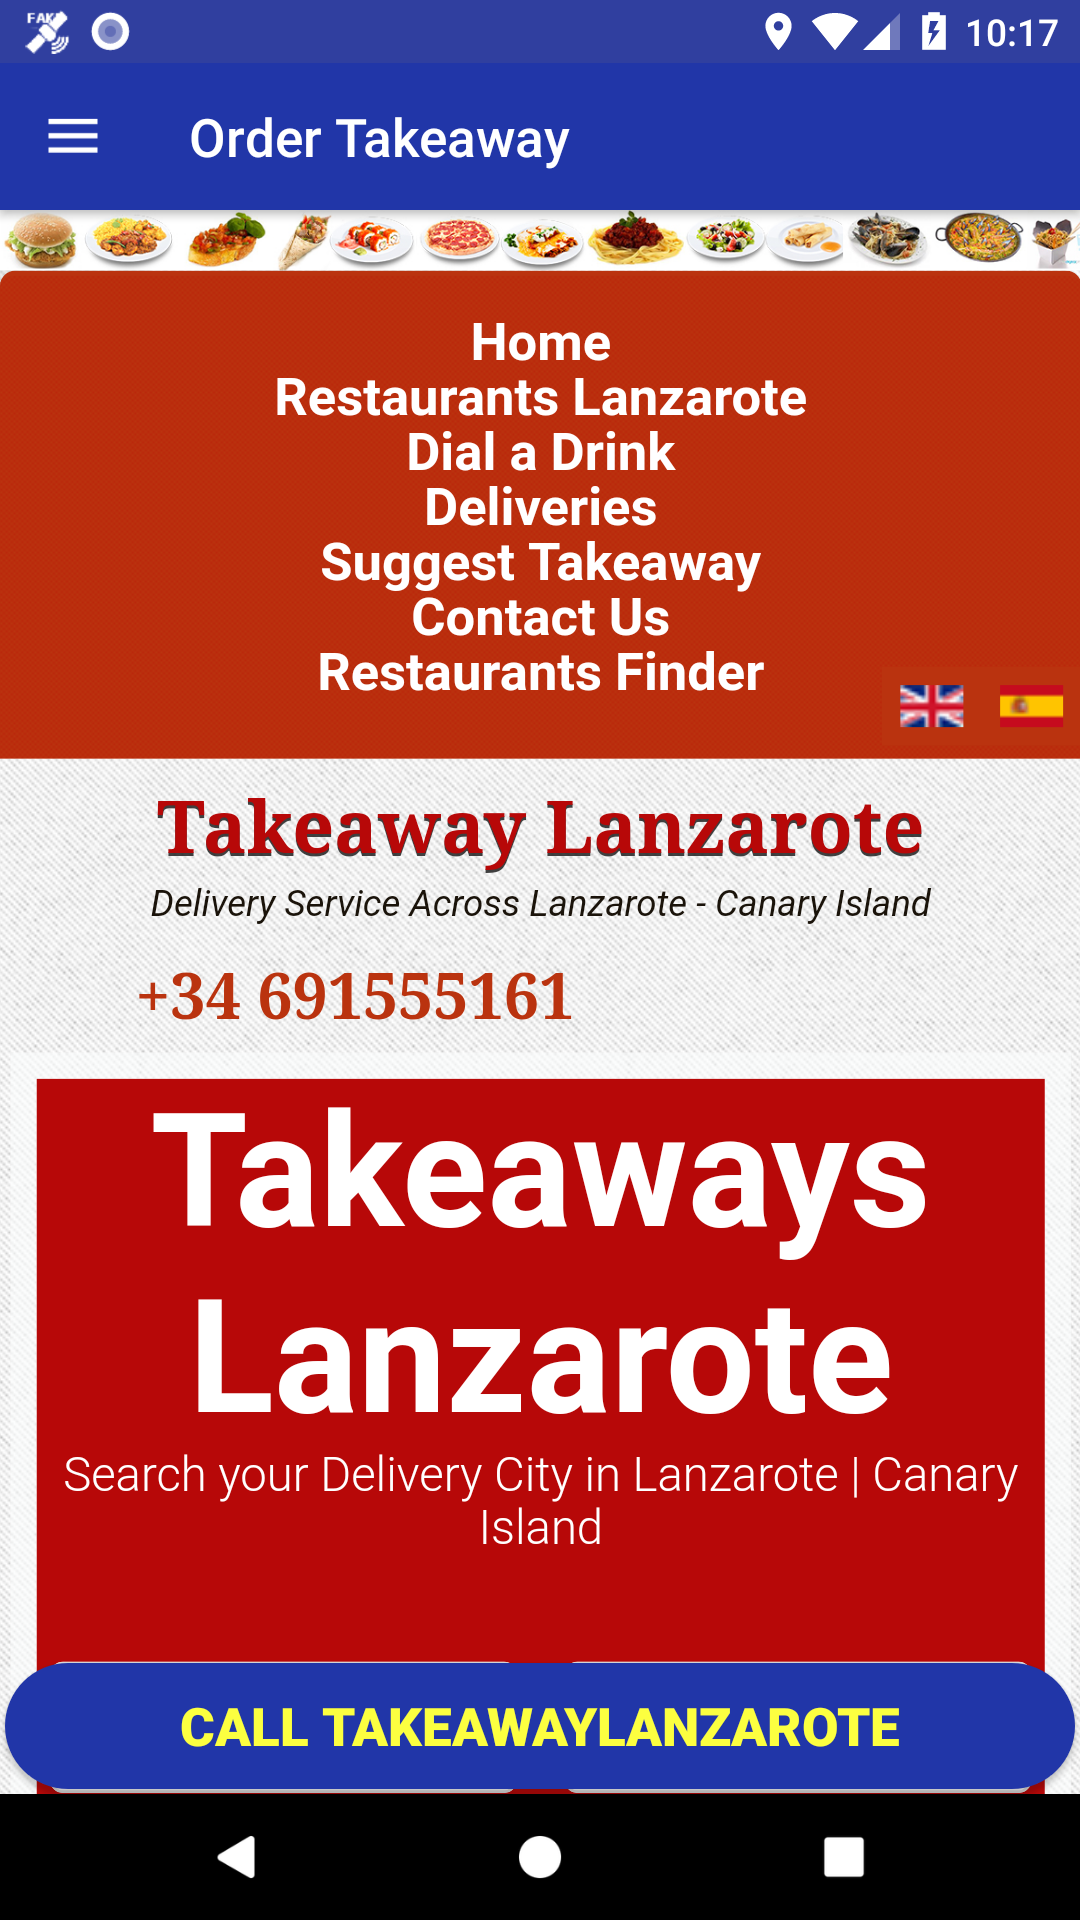 Order Food Airport Transport Tahiche Lanzarote - Private Drivers Tahiche Lanzarote - Book a Taxi Tahiche Lanzarote - Airport Transfers with Private Chauffeur Services - Arrecife Airport Transfers - Taxi Bookings Tahiche Lanzarote - Airport Transfers Bookings Tahiche Lanzarote - Professional Taxi - Private Taxi -Arrecife Airport Taxi - Book Taxi Tahiche Lanzarote Your Local Expert for Airport Transfers - Taxi For Groups - Taxi For Private Events - Taxi Rentals - Taxi For Airports